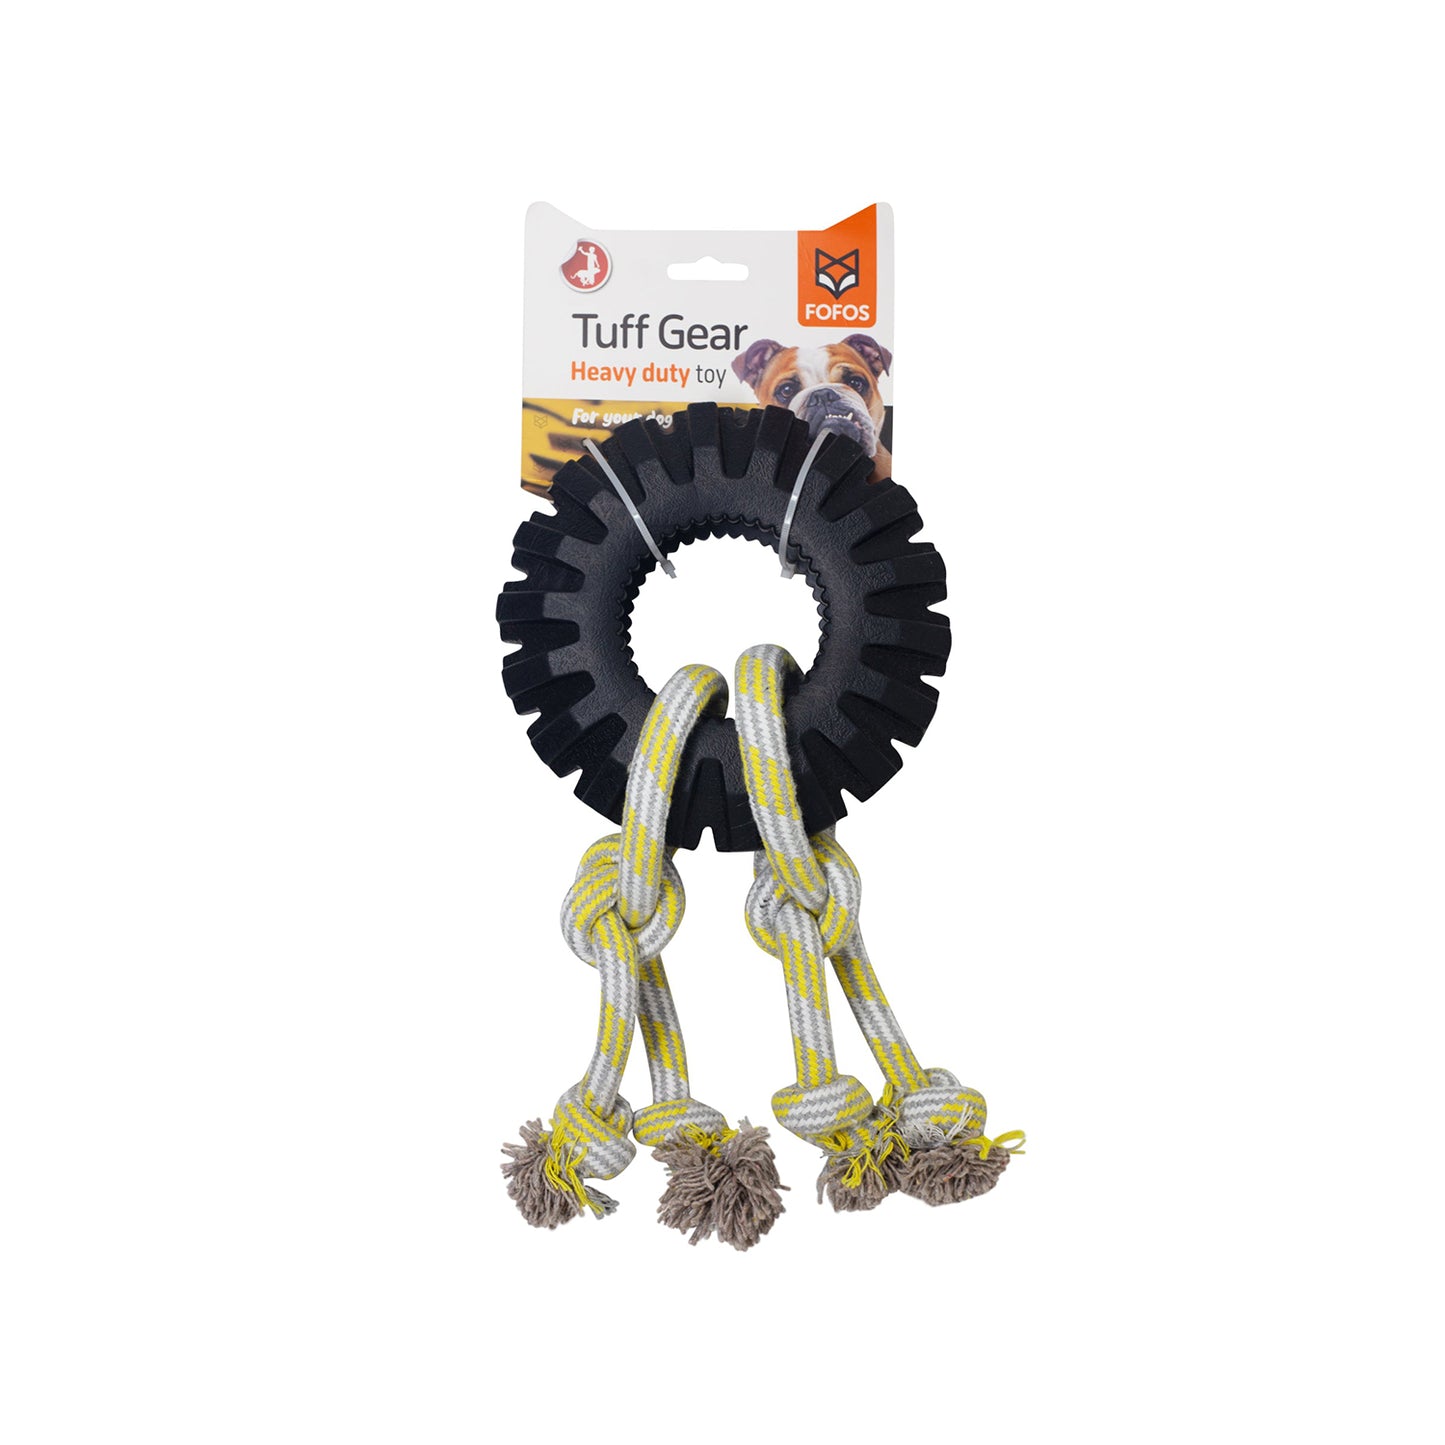 Fofos - Super Chewer Tyre Dog Rope Toy